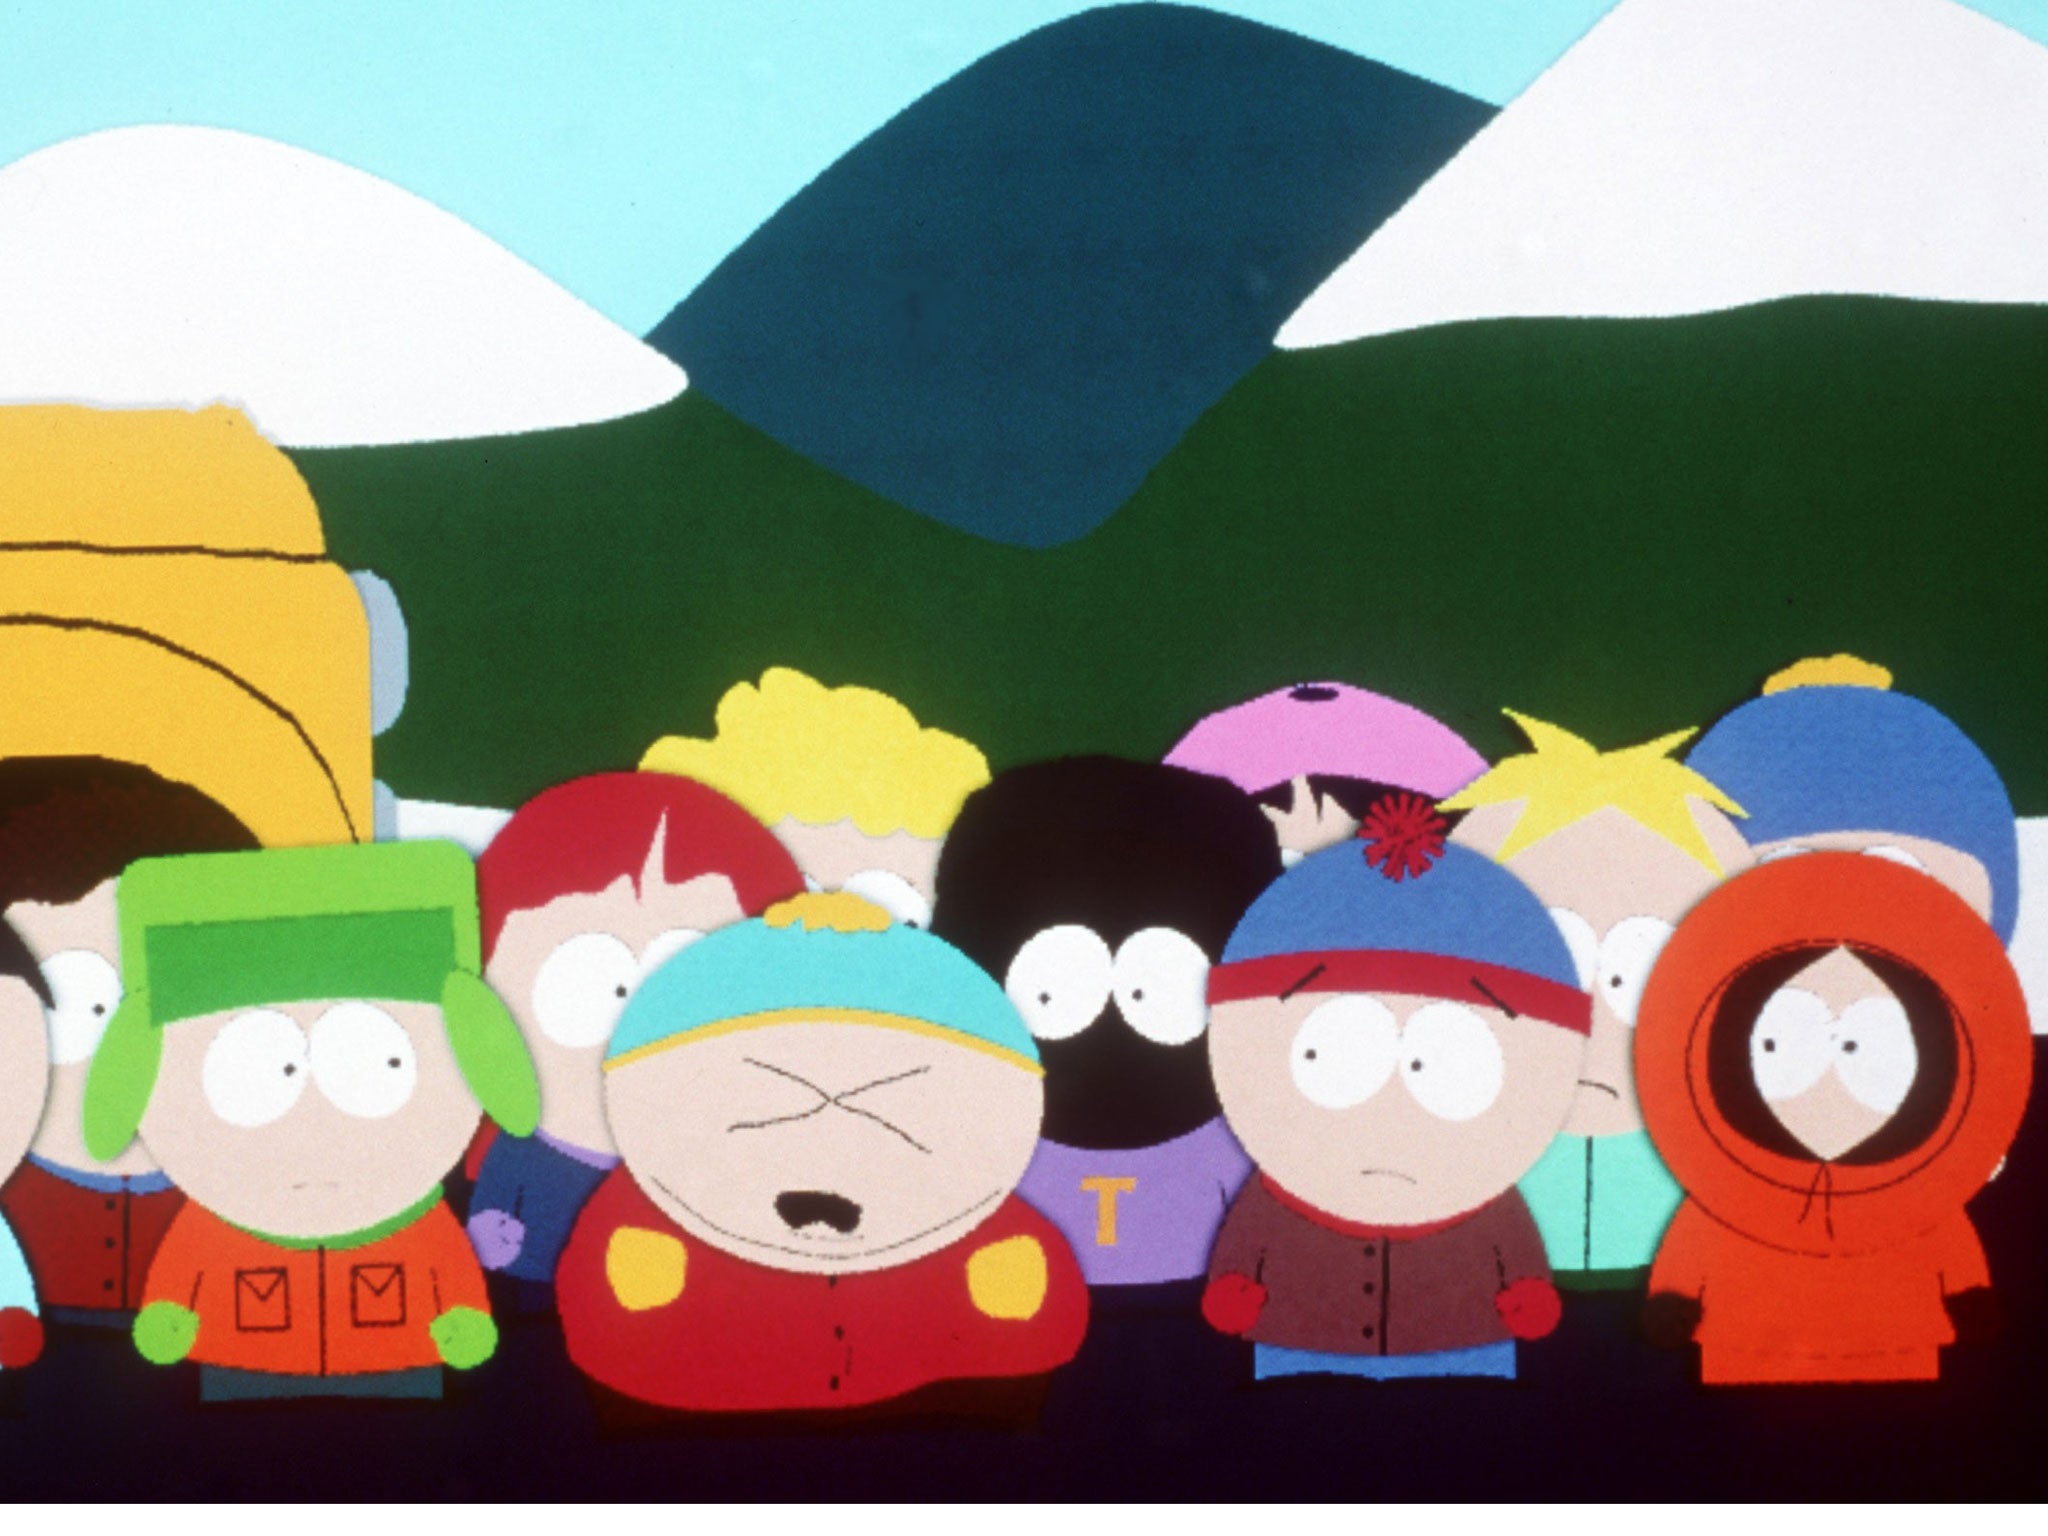 South Park's characters will miss their cue during the power outage